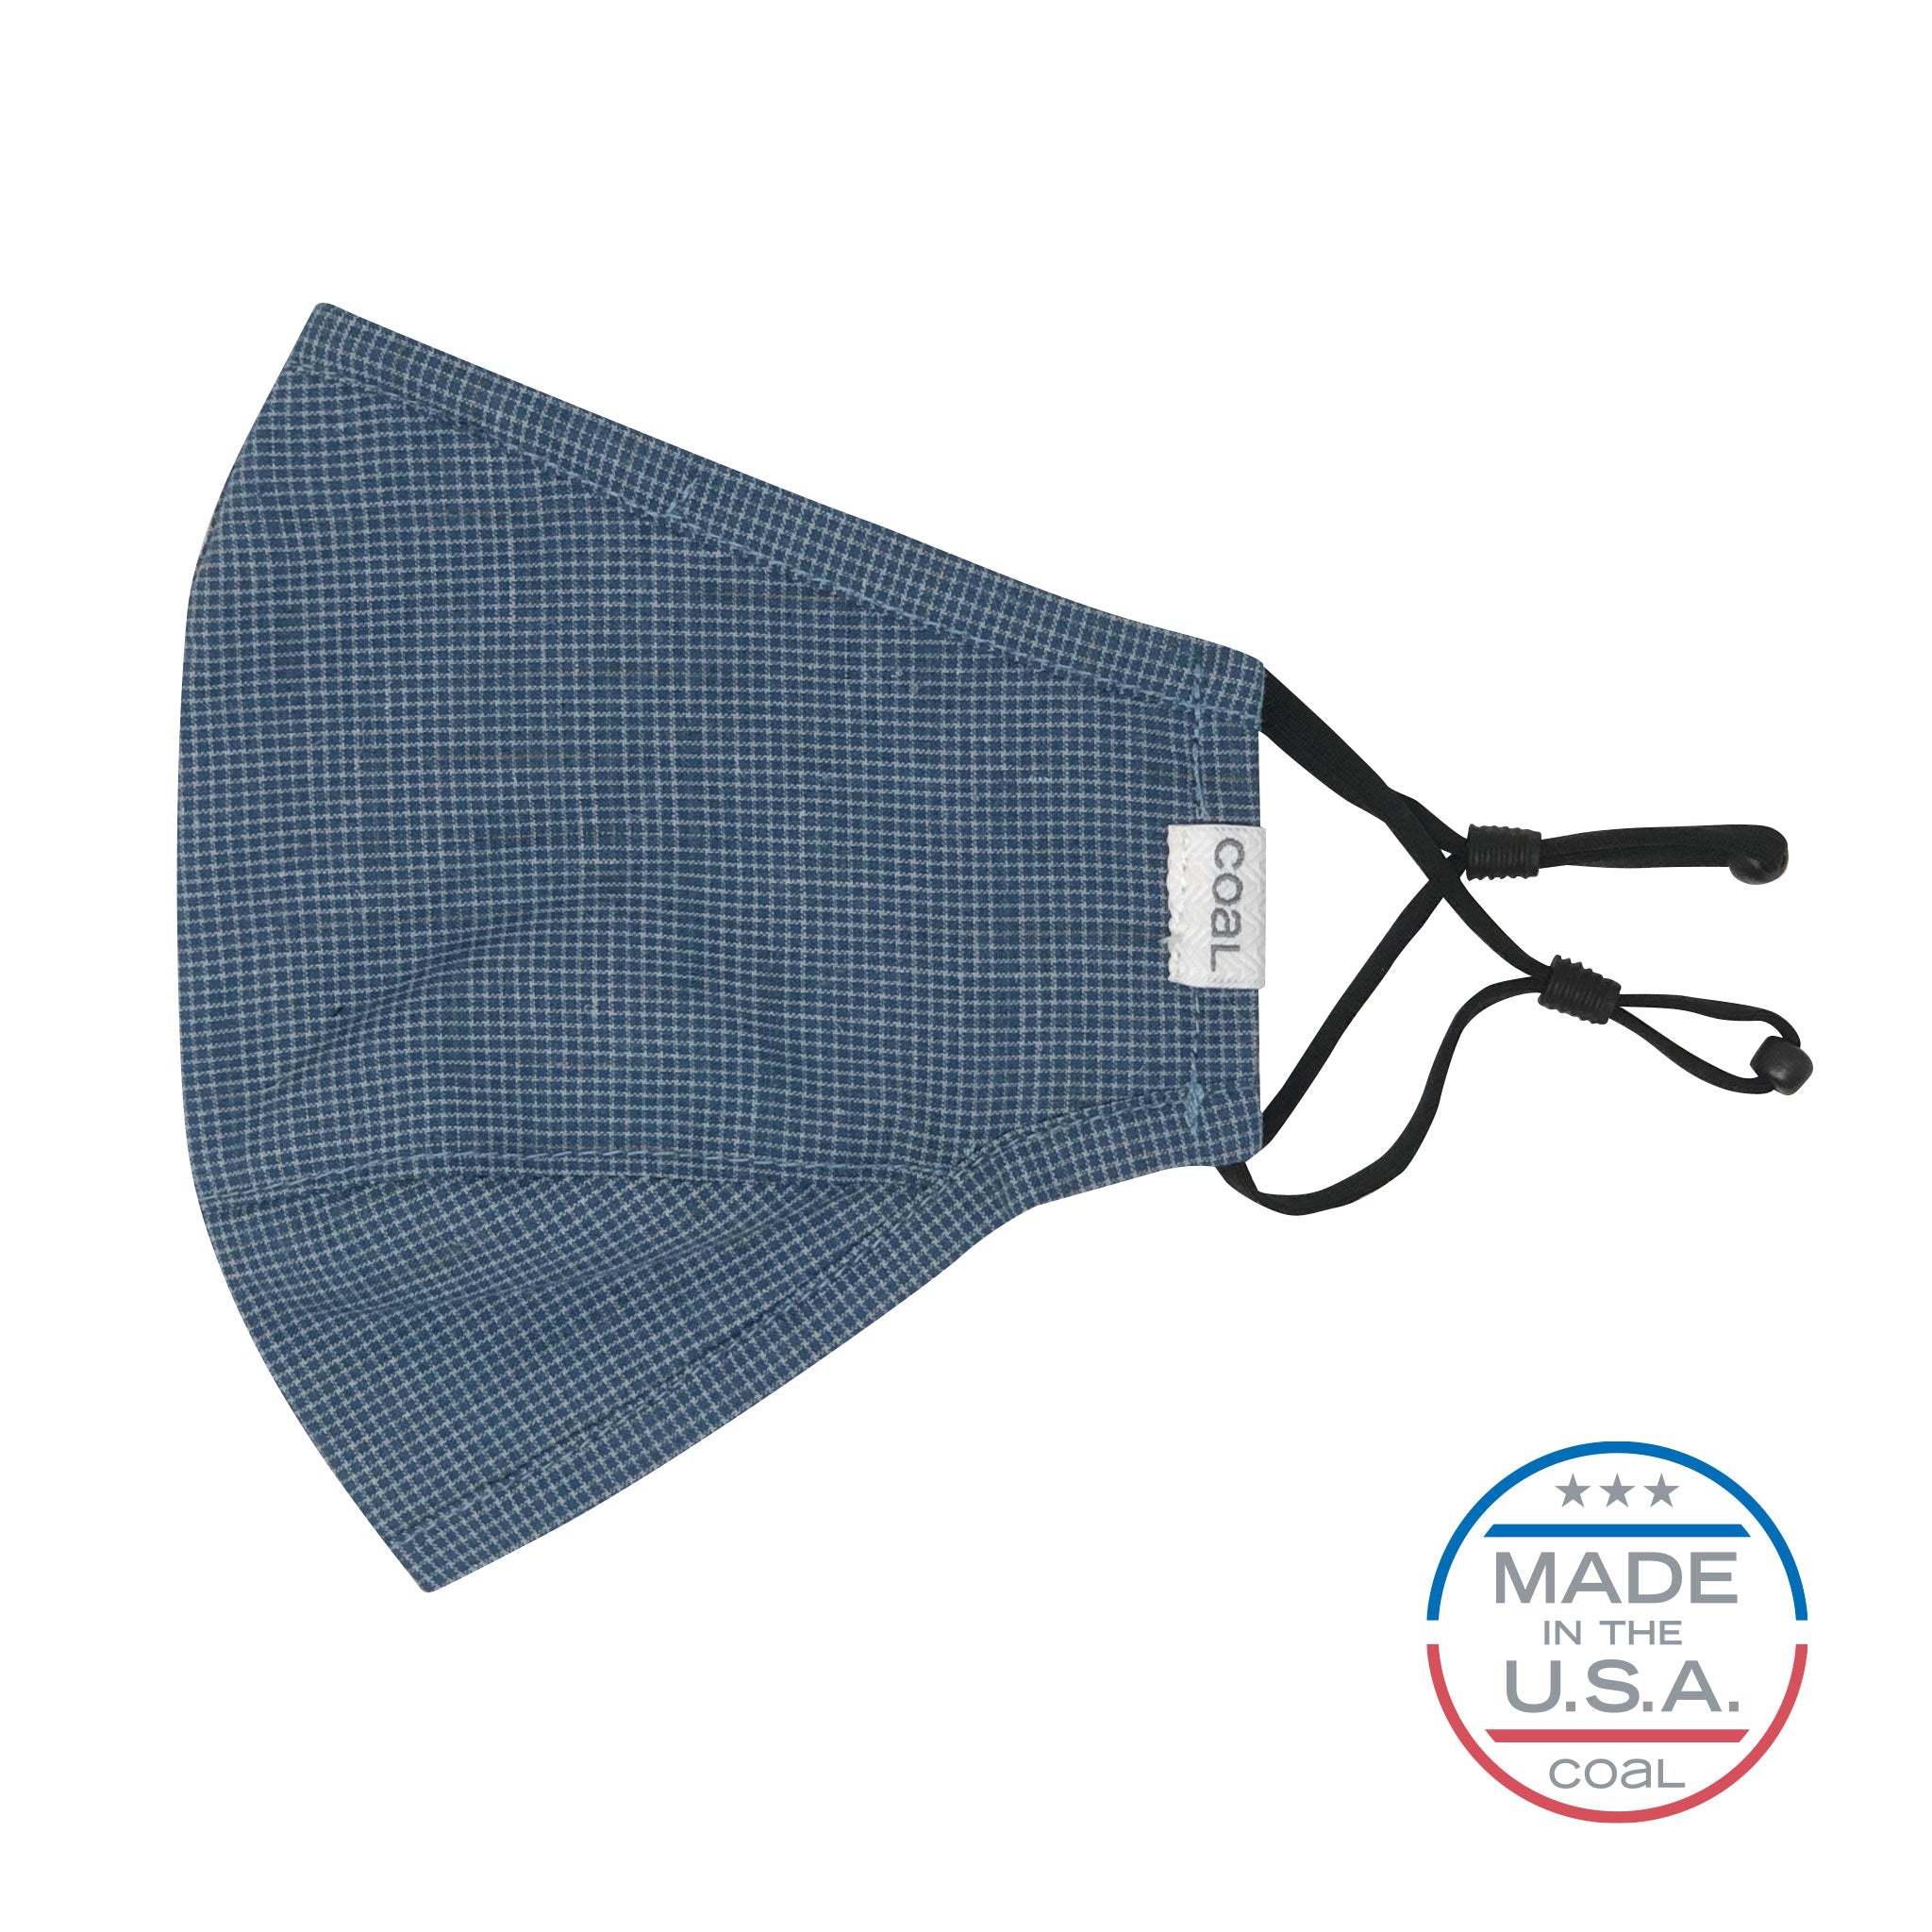 The Ergo Face Mask with Filter Pocket - USA Made, Navy Gingham